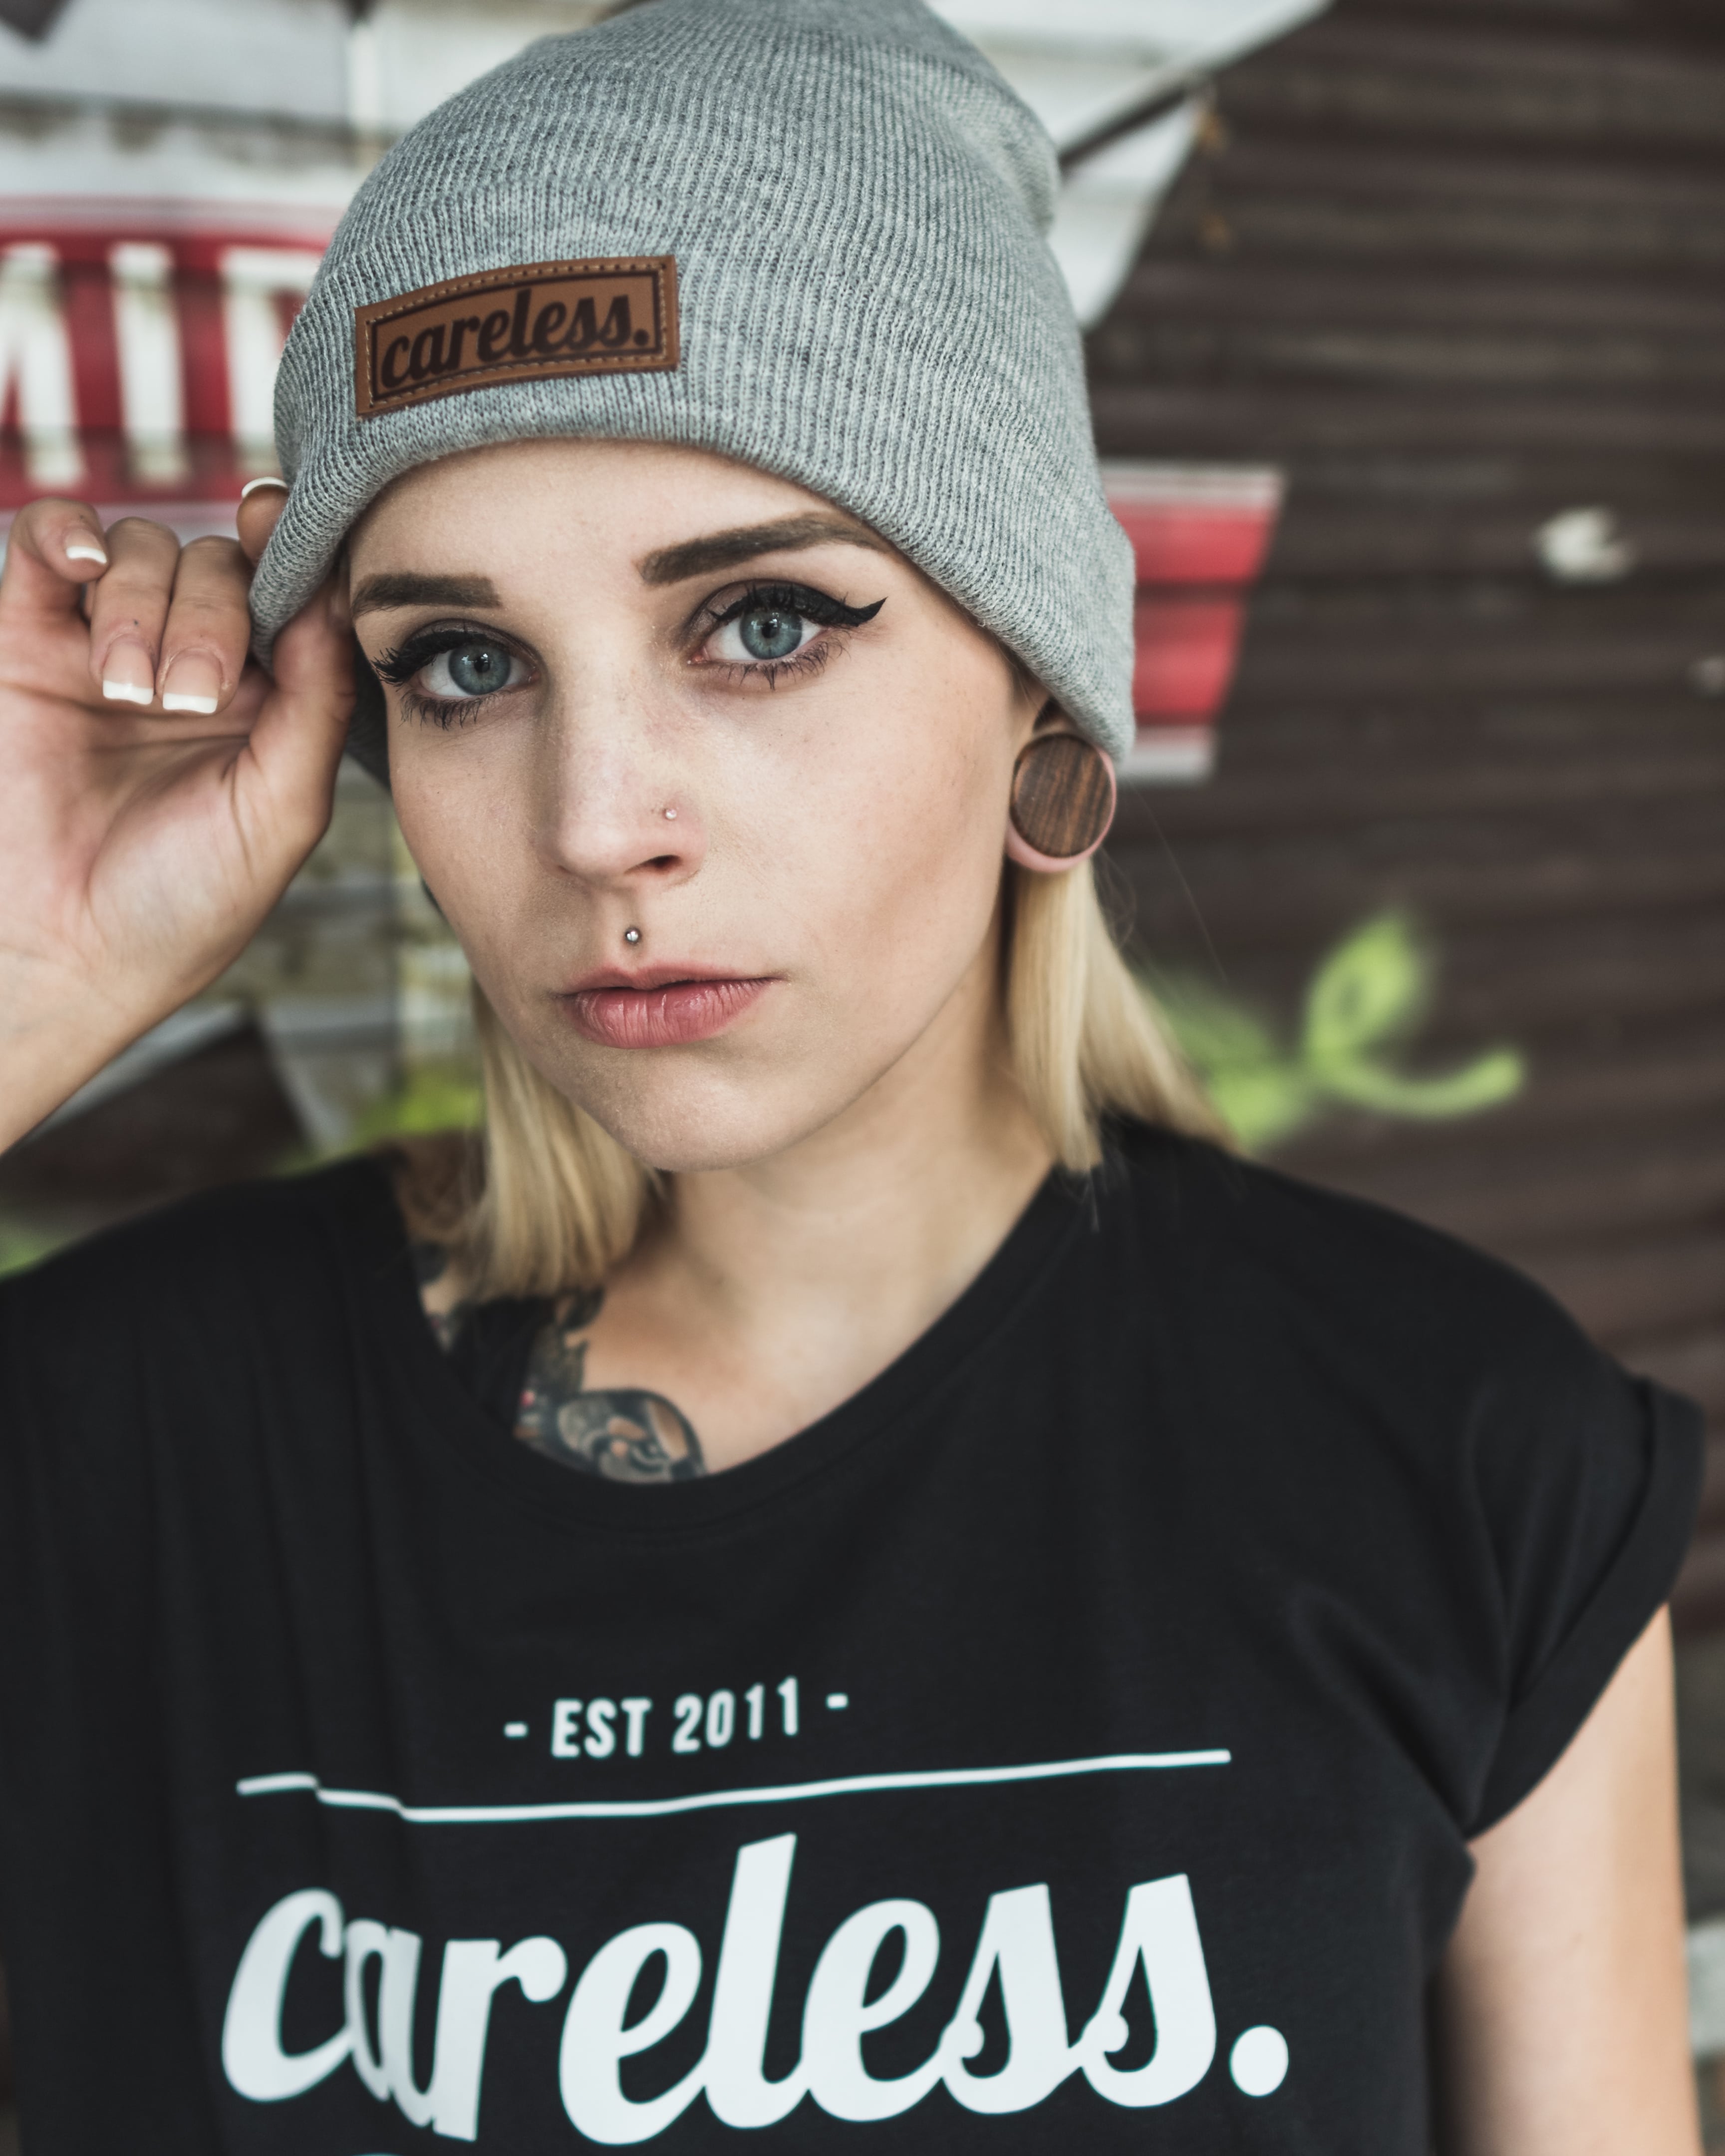 https://toh.photography/media/pages/portfolio/shooting-bei-careless-clothing-streetfashion-in-frankfurt/5c93a5c686-1585504328/p7140151.jpg